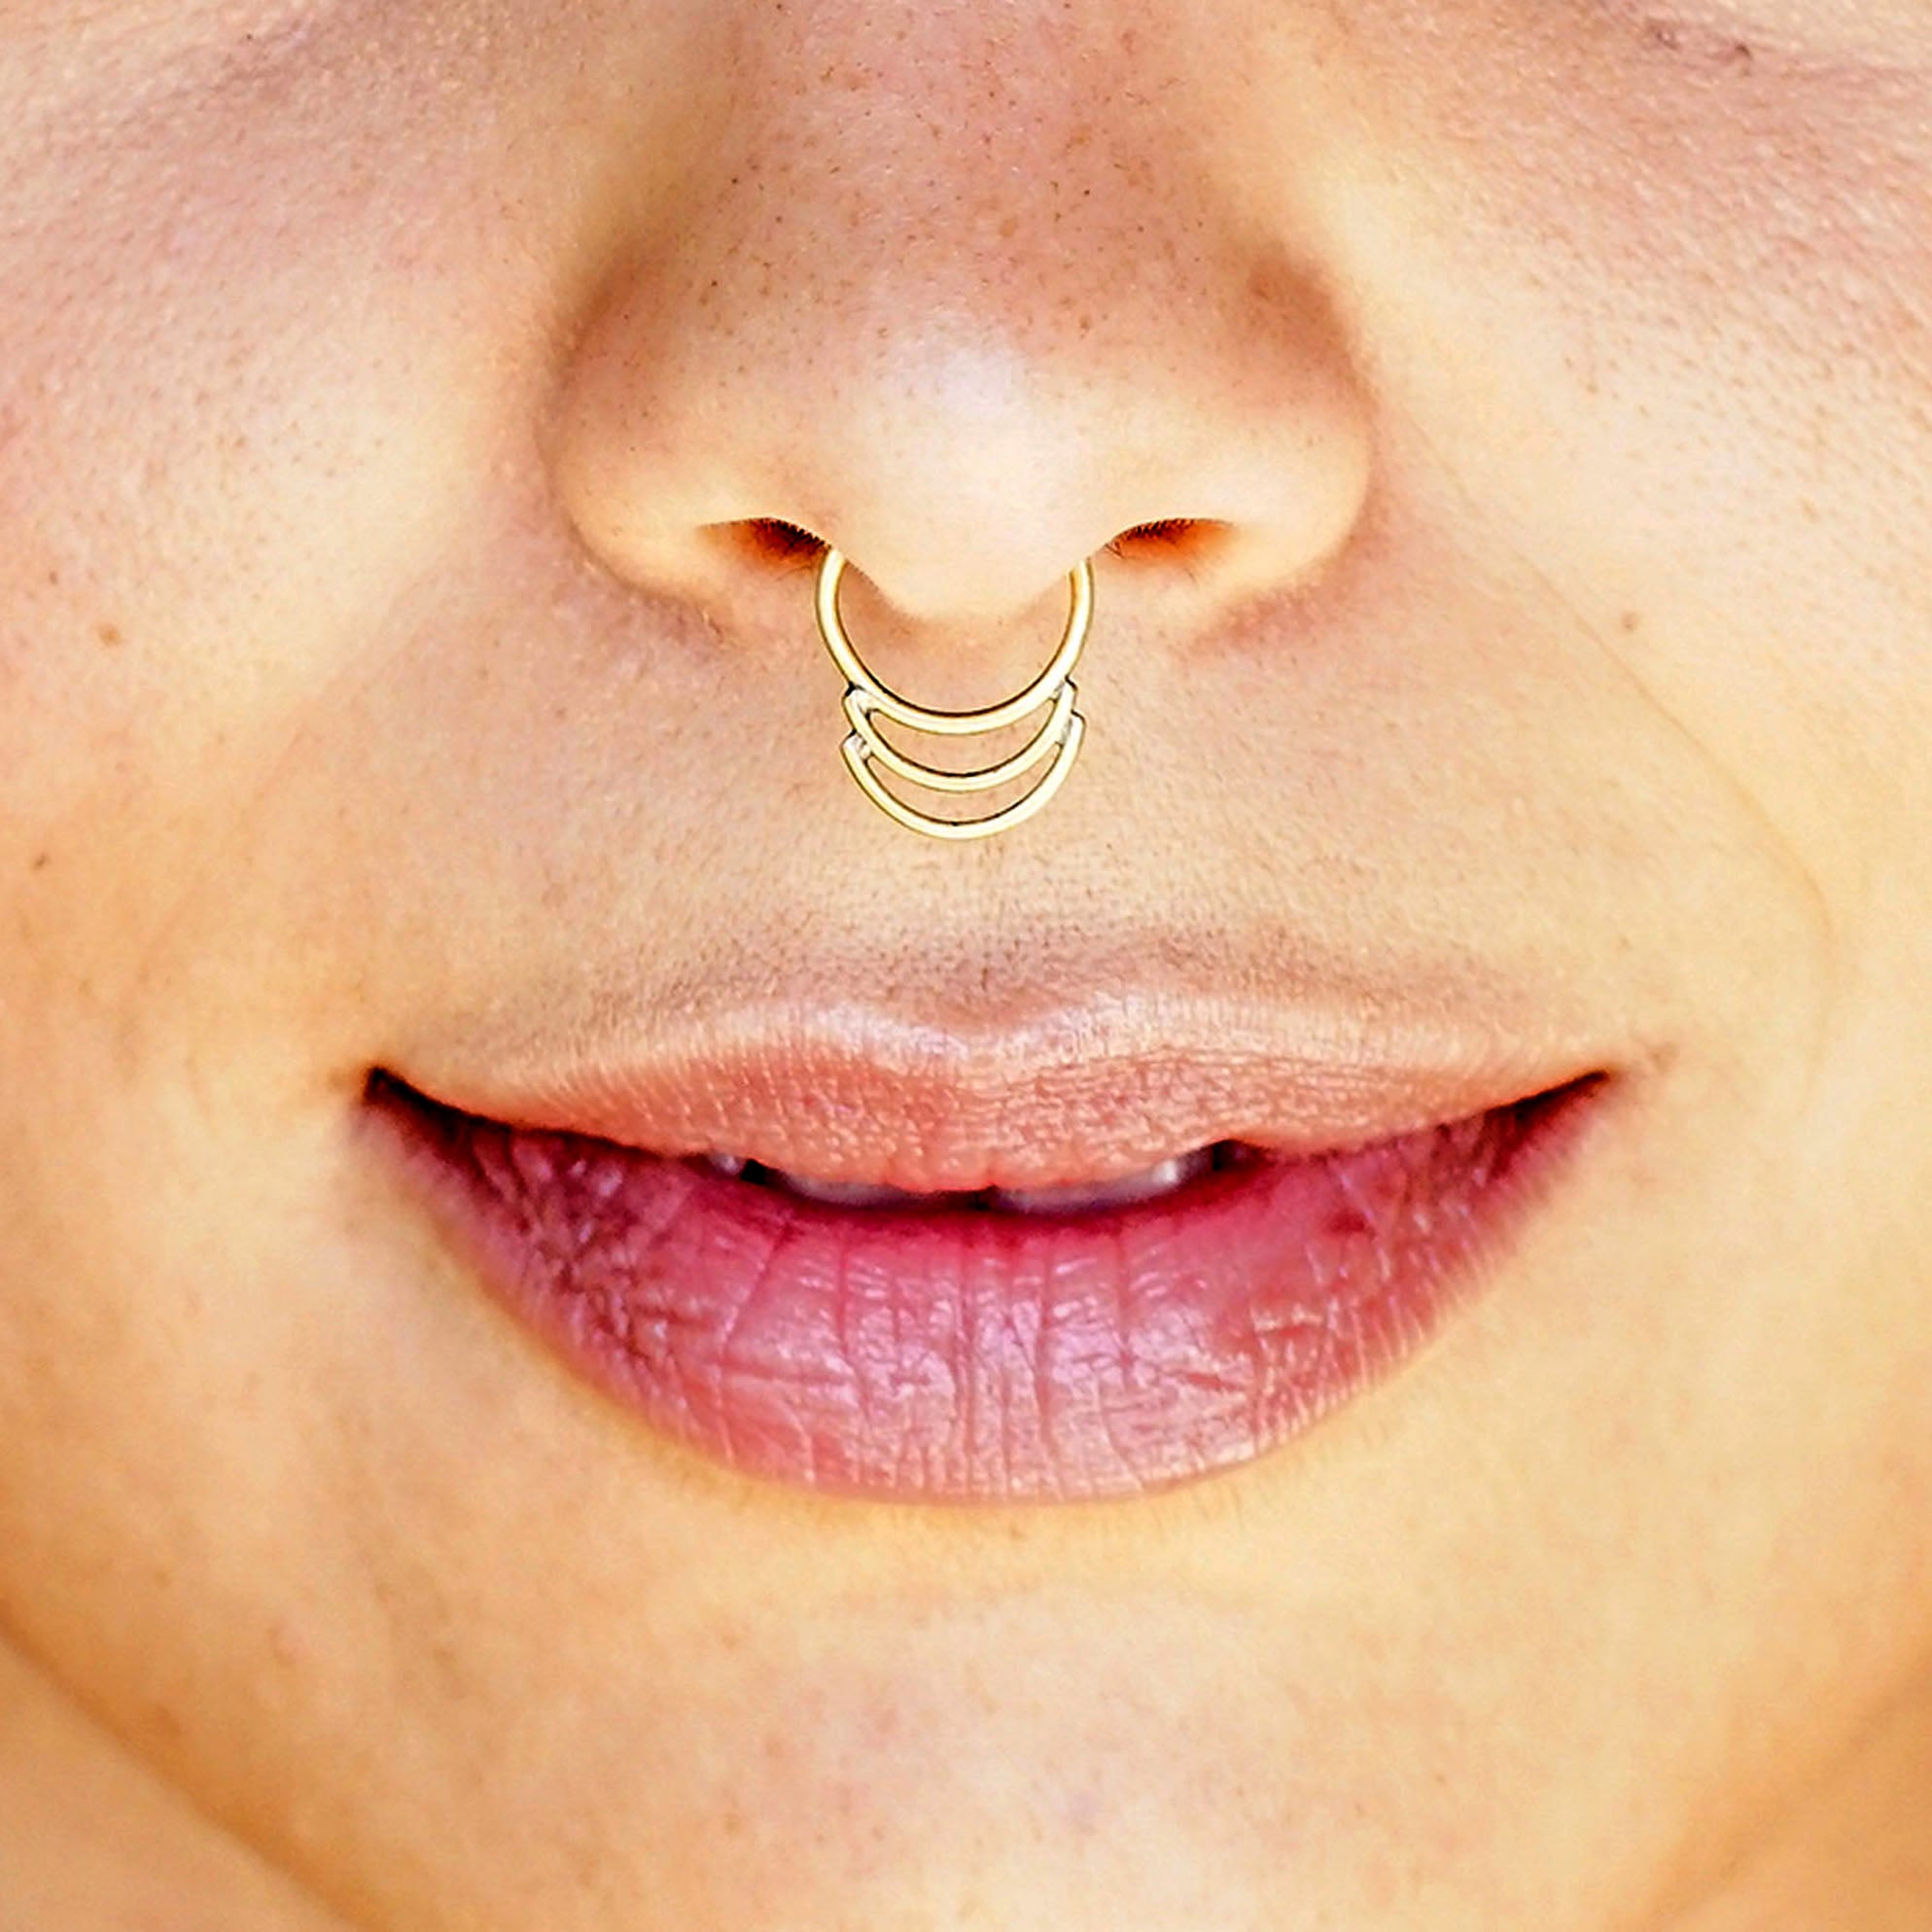 1x Dainty Fake/faux Septum Ring Surgical Steel Silver,Yellow or Rose Gold  Filled | eBay